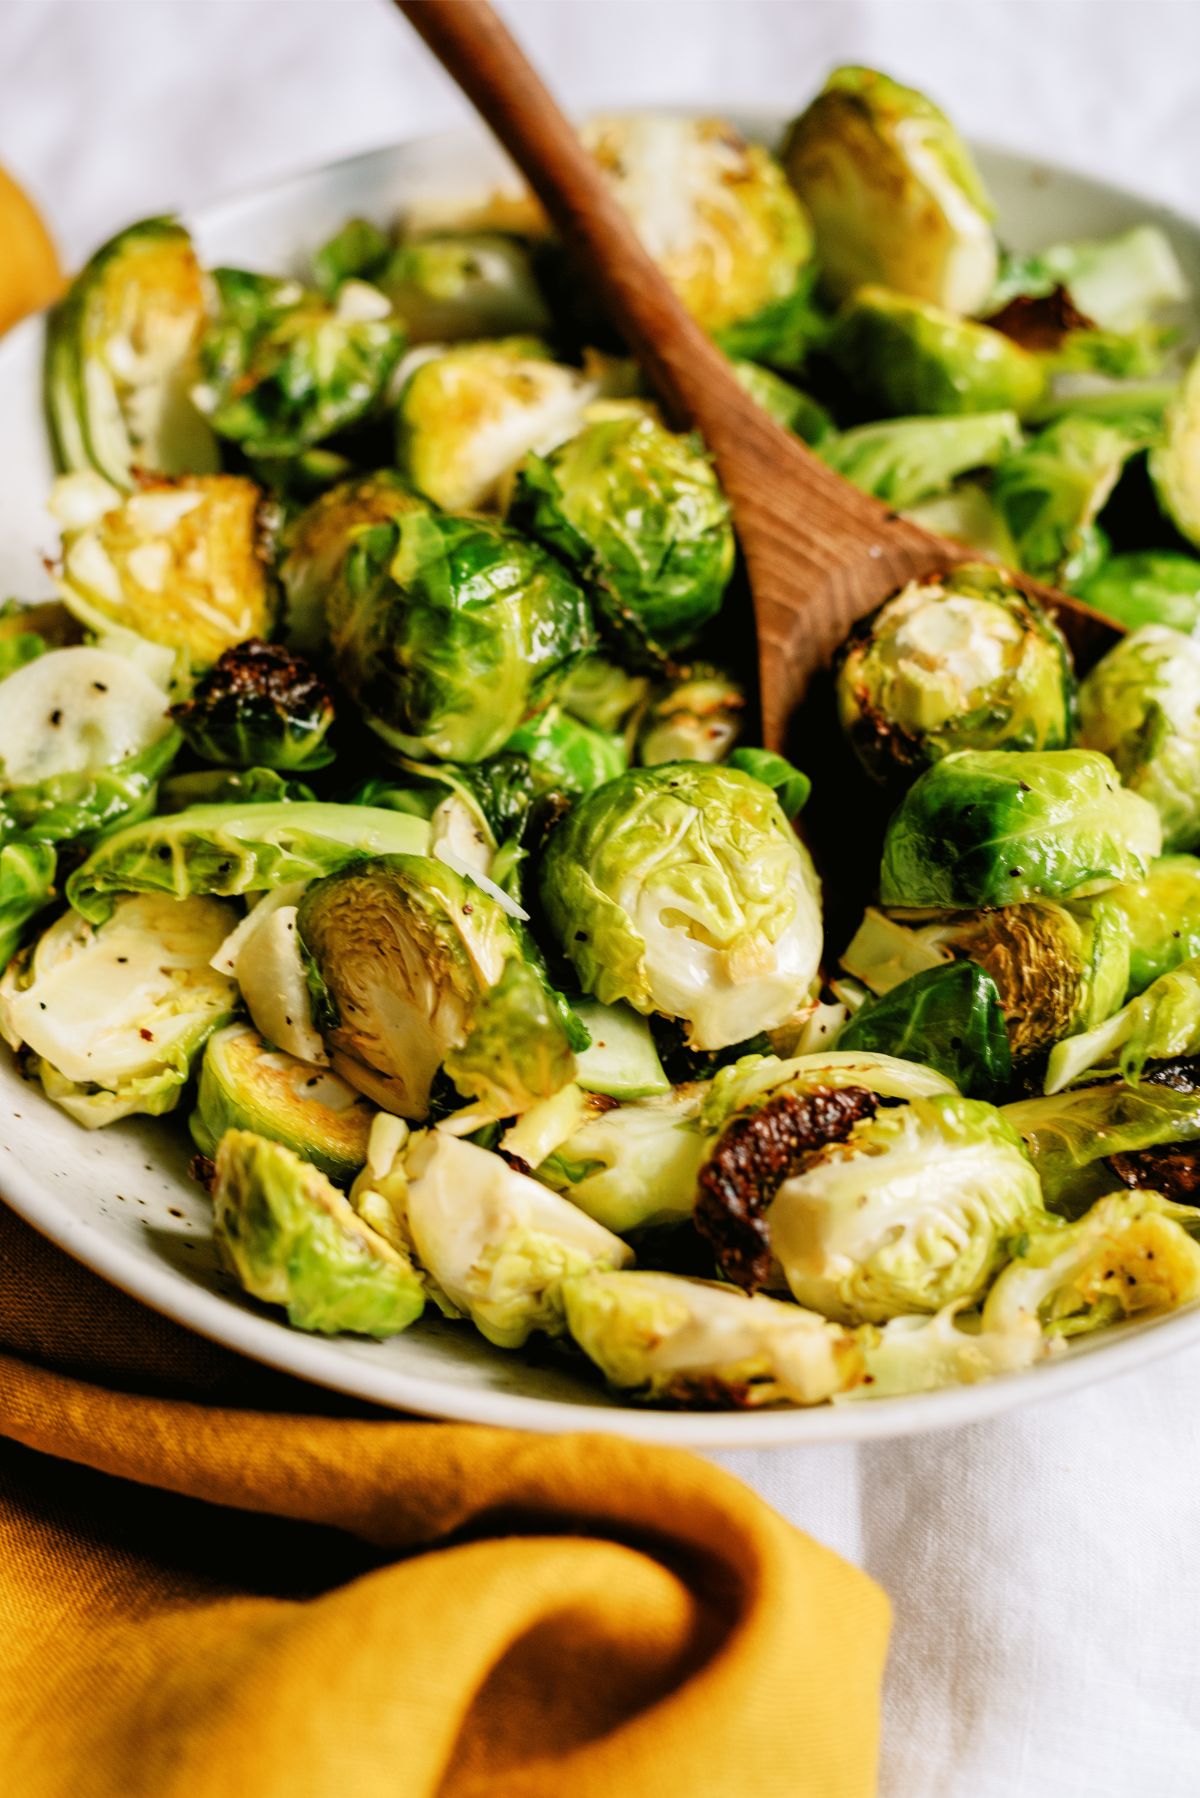 Garlic Roasted Brussels Sprouts in a bowl with a wooden spoon